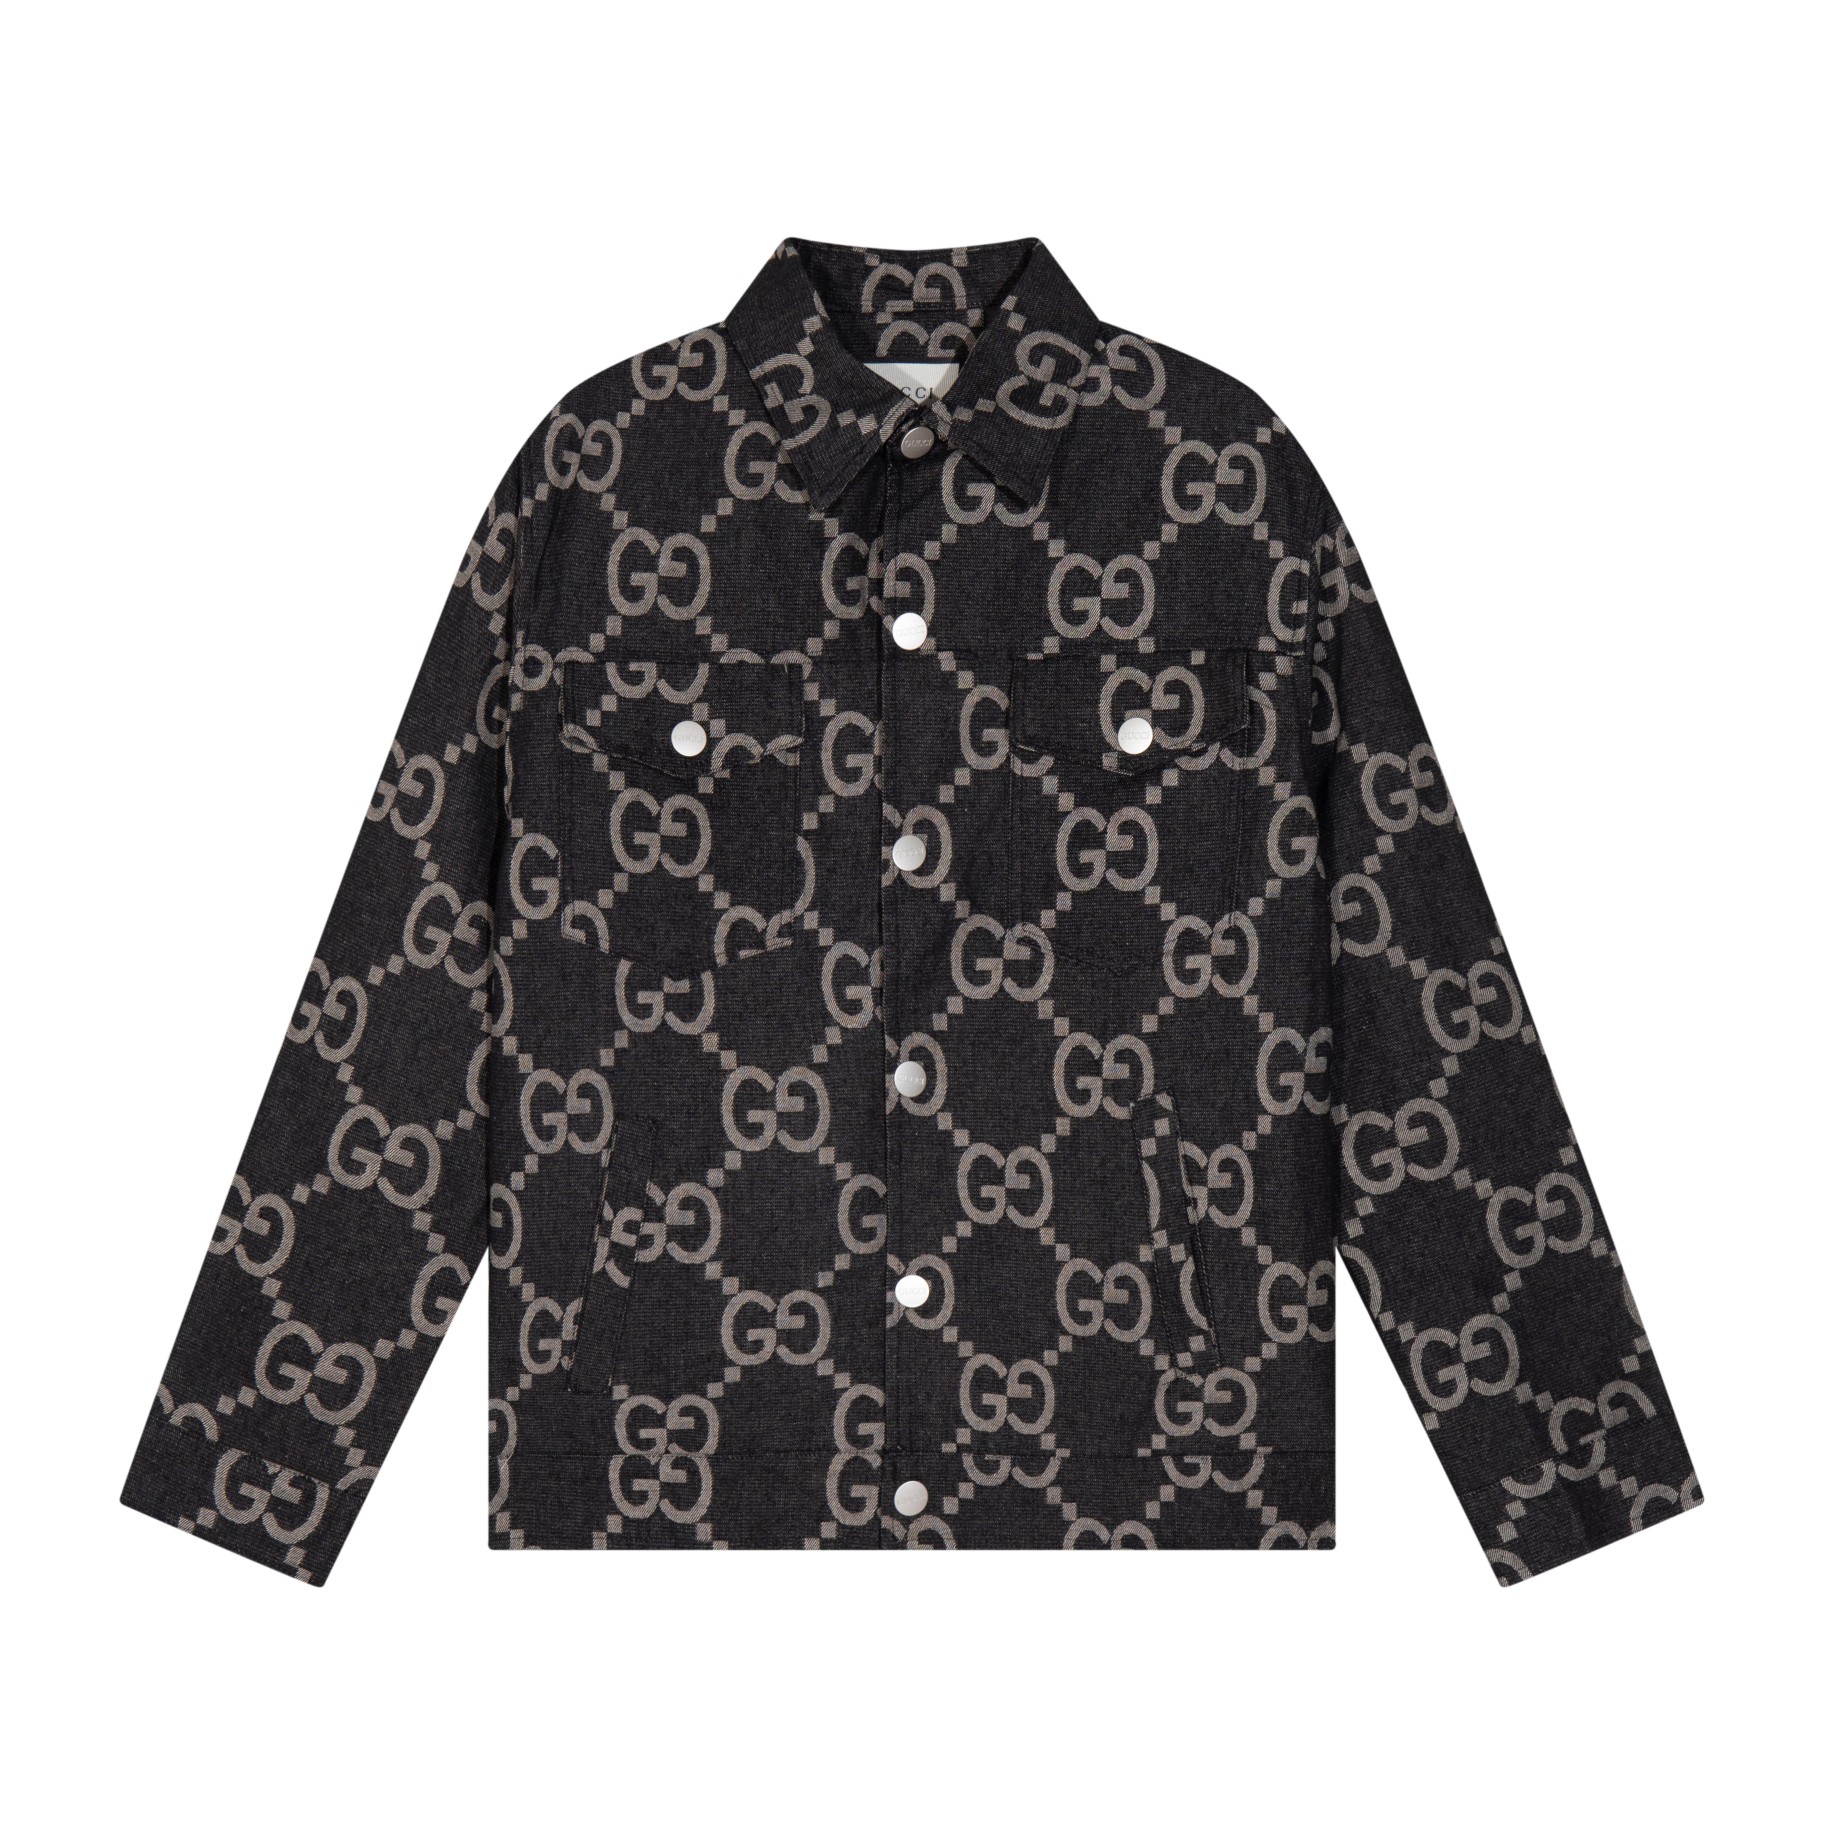 Gucci Clothing Cardigans Same as Original
 Apricot Color Black Blue Khaki Cotton Fall/Winter Collection